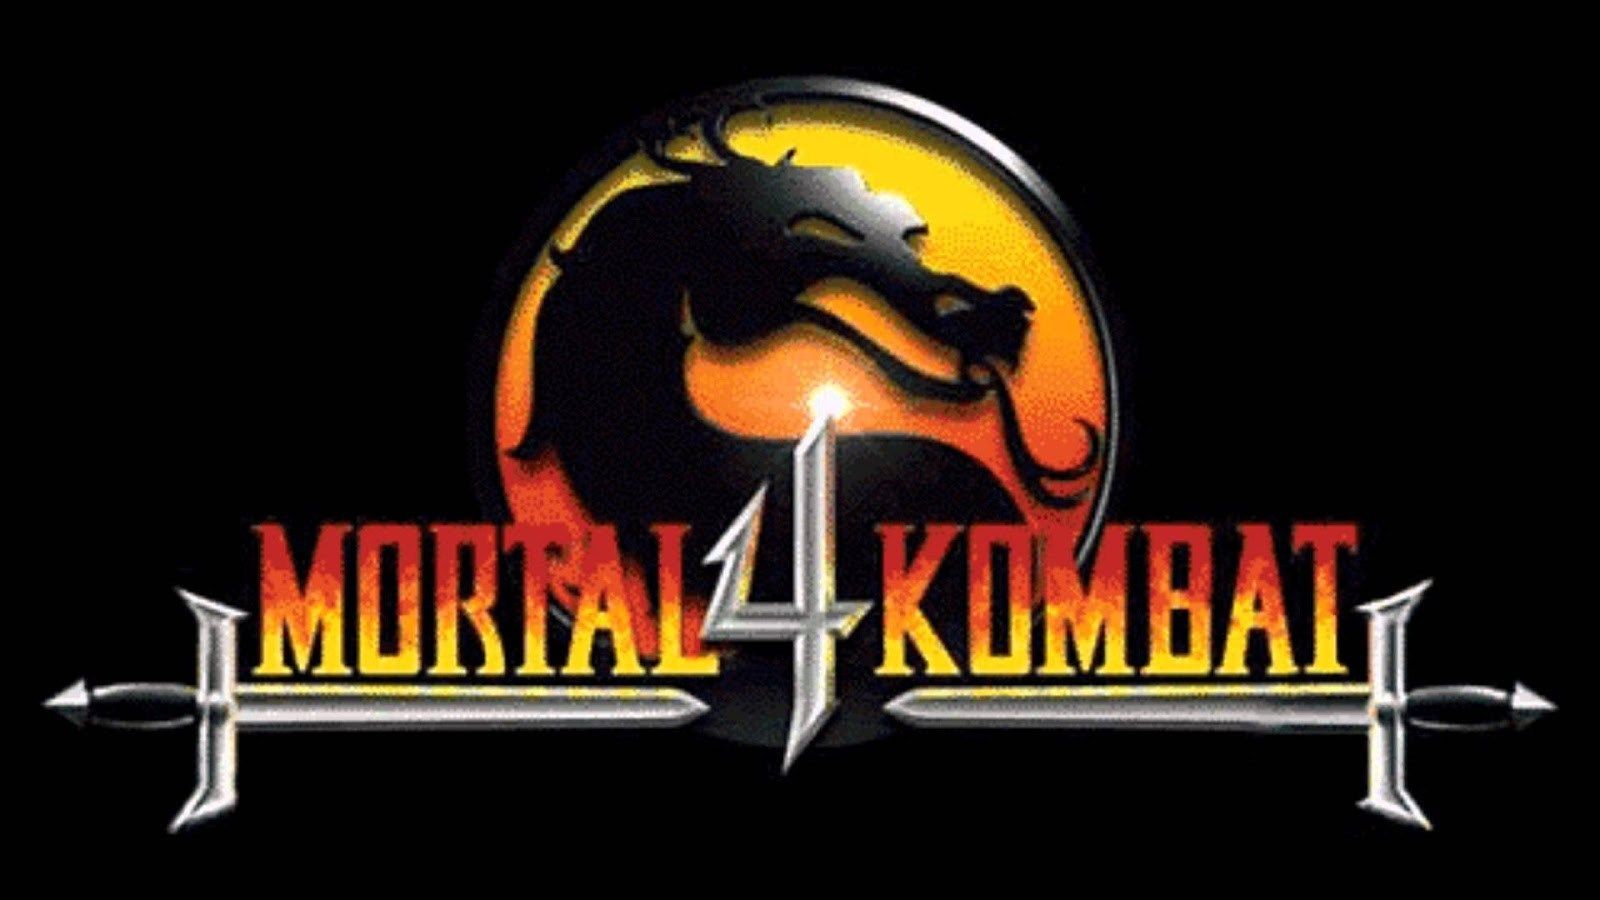 Mortal Kombat 4 reveals the death knell for its launch